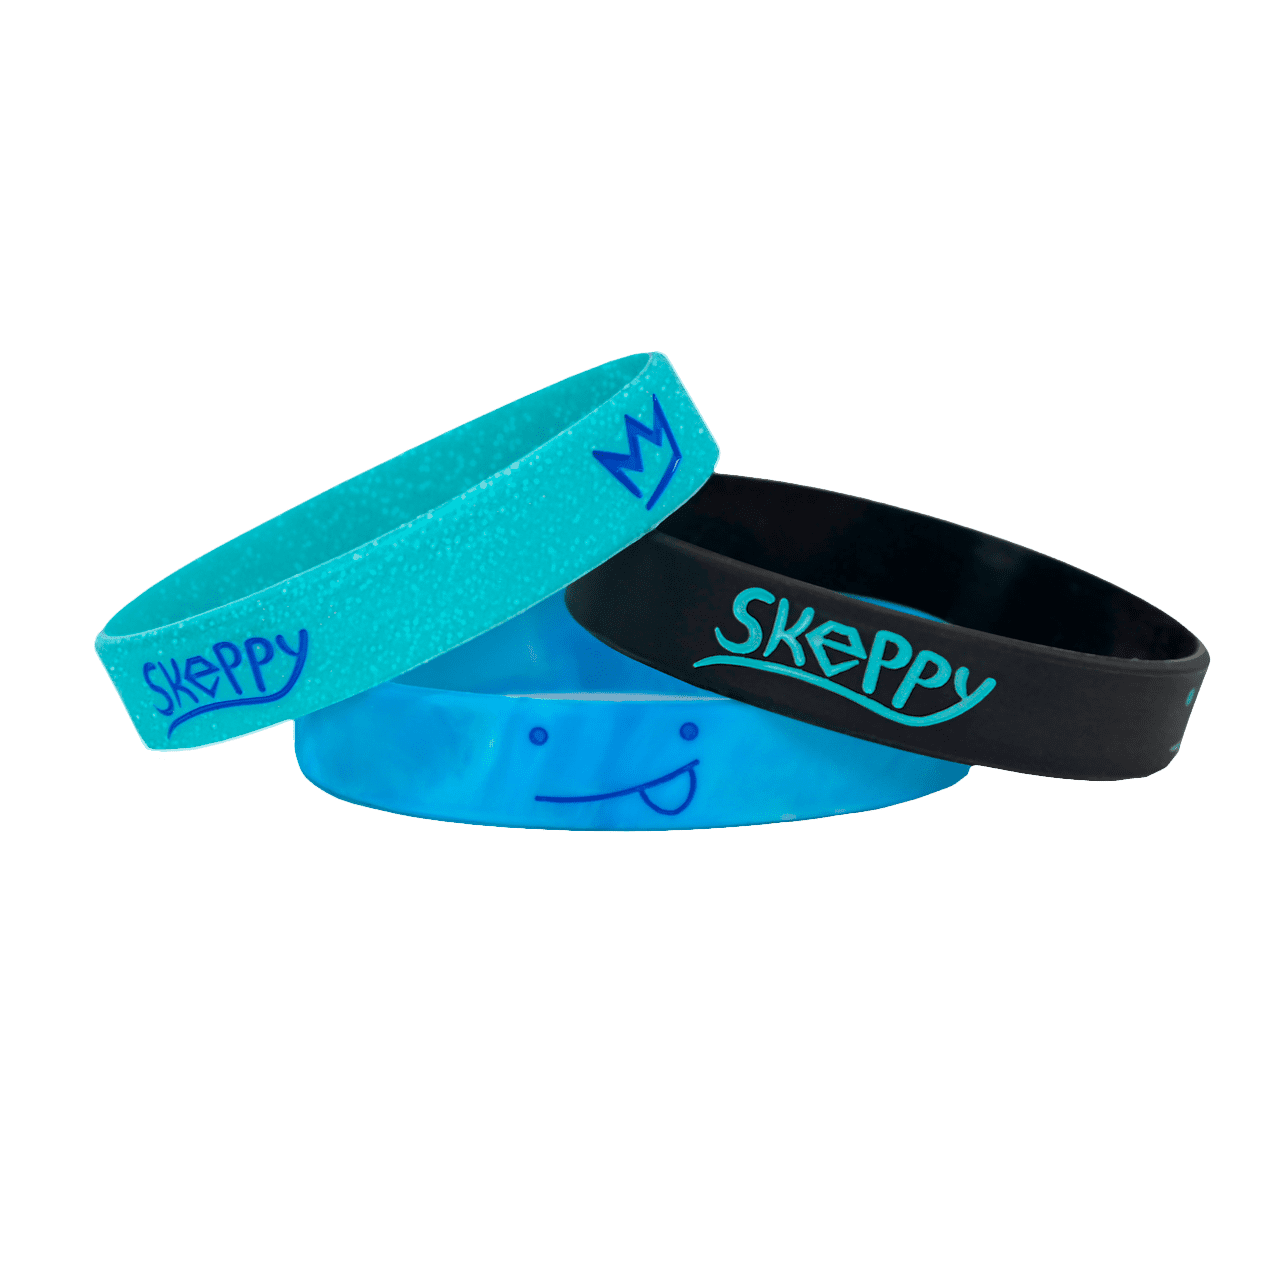 Skeppy Wristbands 3 Pack